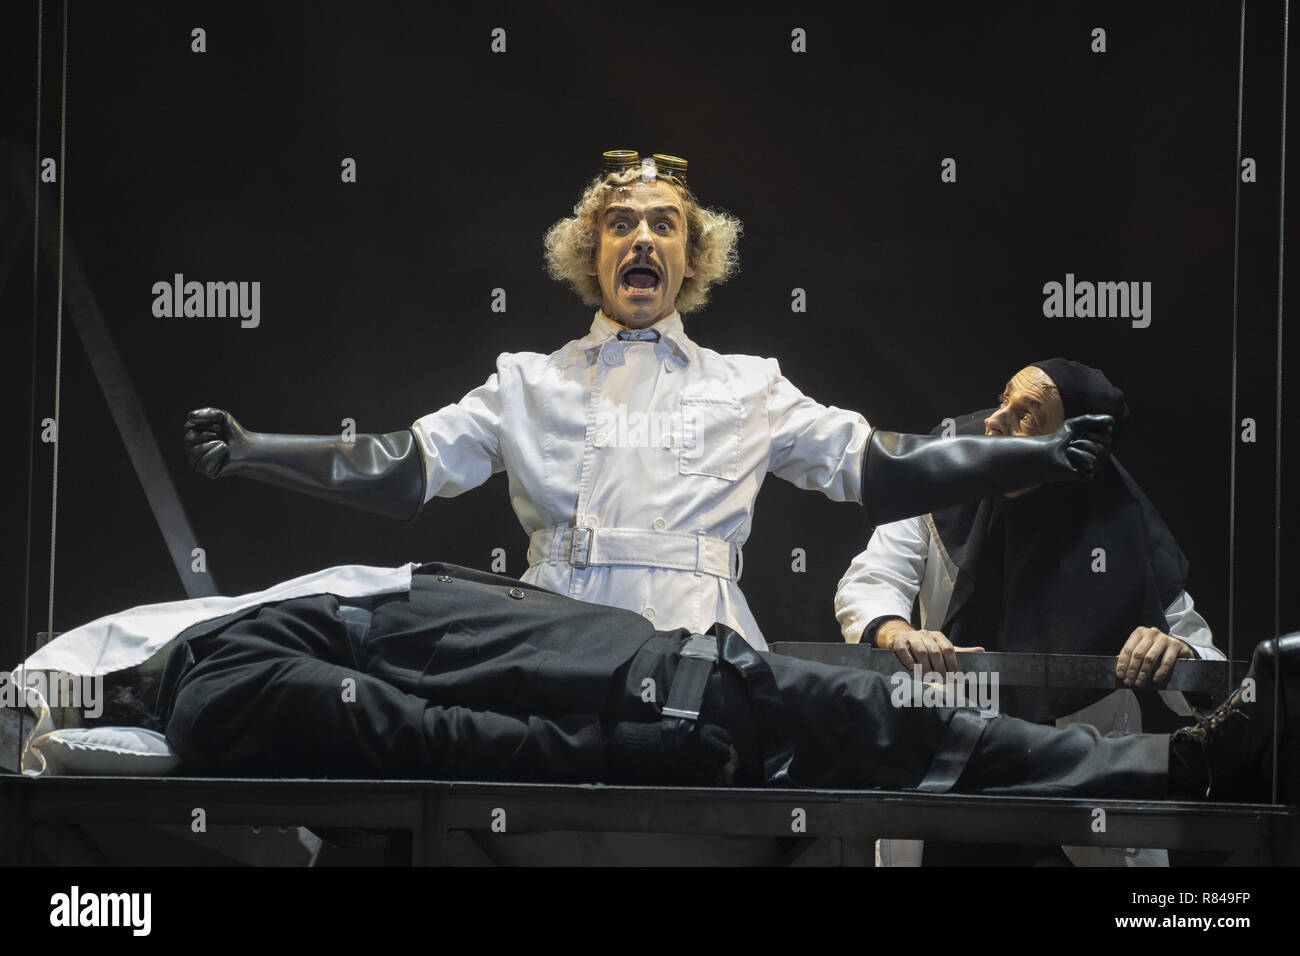 Stage musical 'Young Frankenstein' ahead of the premiere on 13 November  2018 at the Teatro de la Luz Philips Gran Via in Madrid, Spain. Featuring:  Atmosphere Where: Madrid, Community of Madrid, Spain